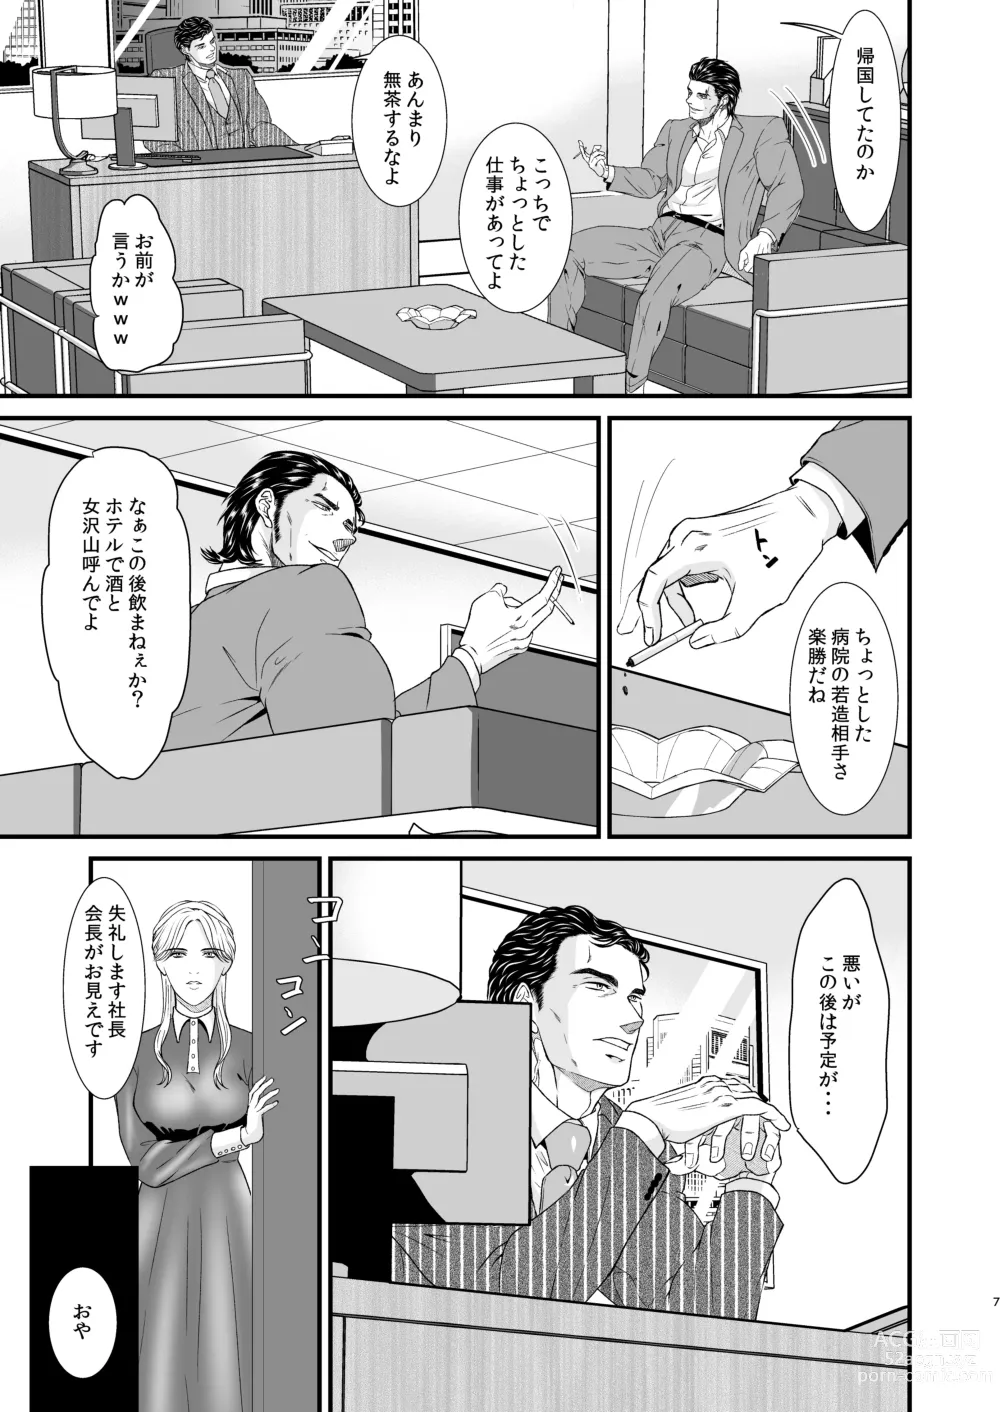 Page 6 of doujinshi Confusion 2